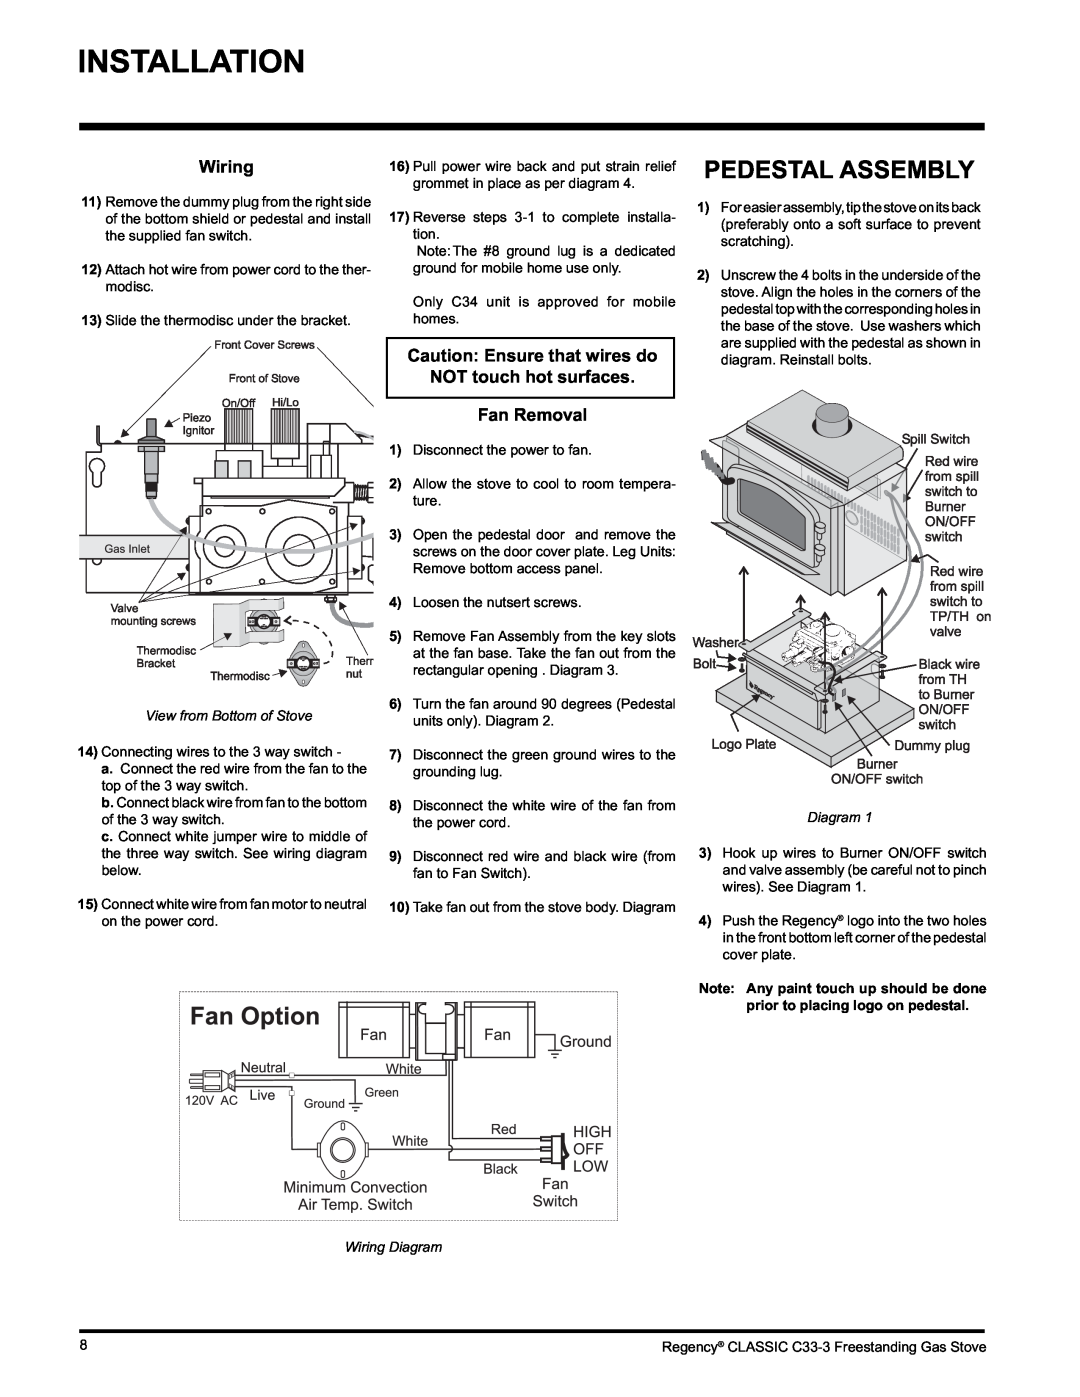 Regency C33-LP3 Pedestal Assembly, Wiring, Caution Ensure that wires do, NOT touch hot surfaces Fan Removal, Diagram 